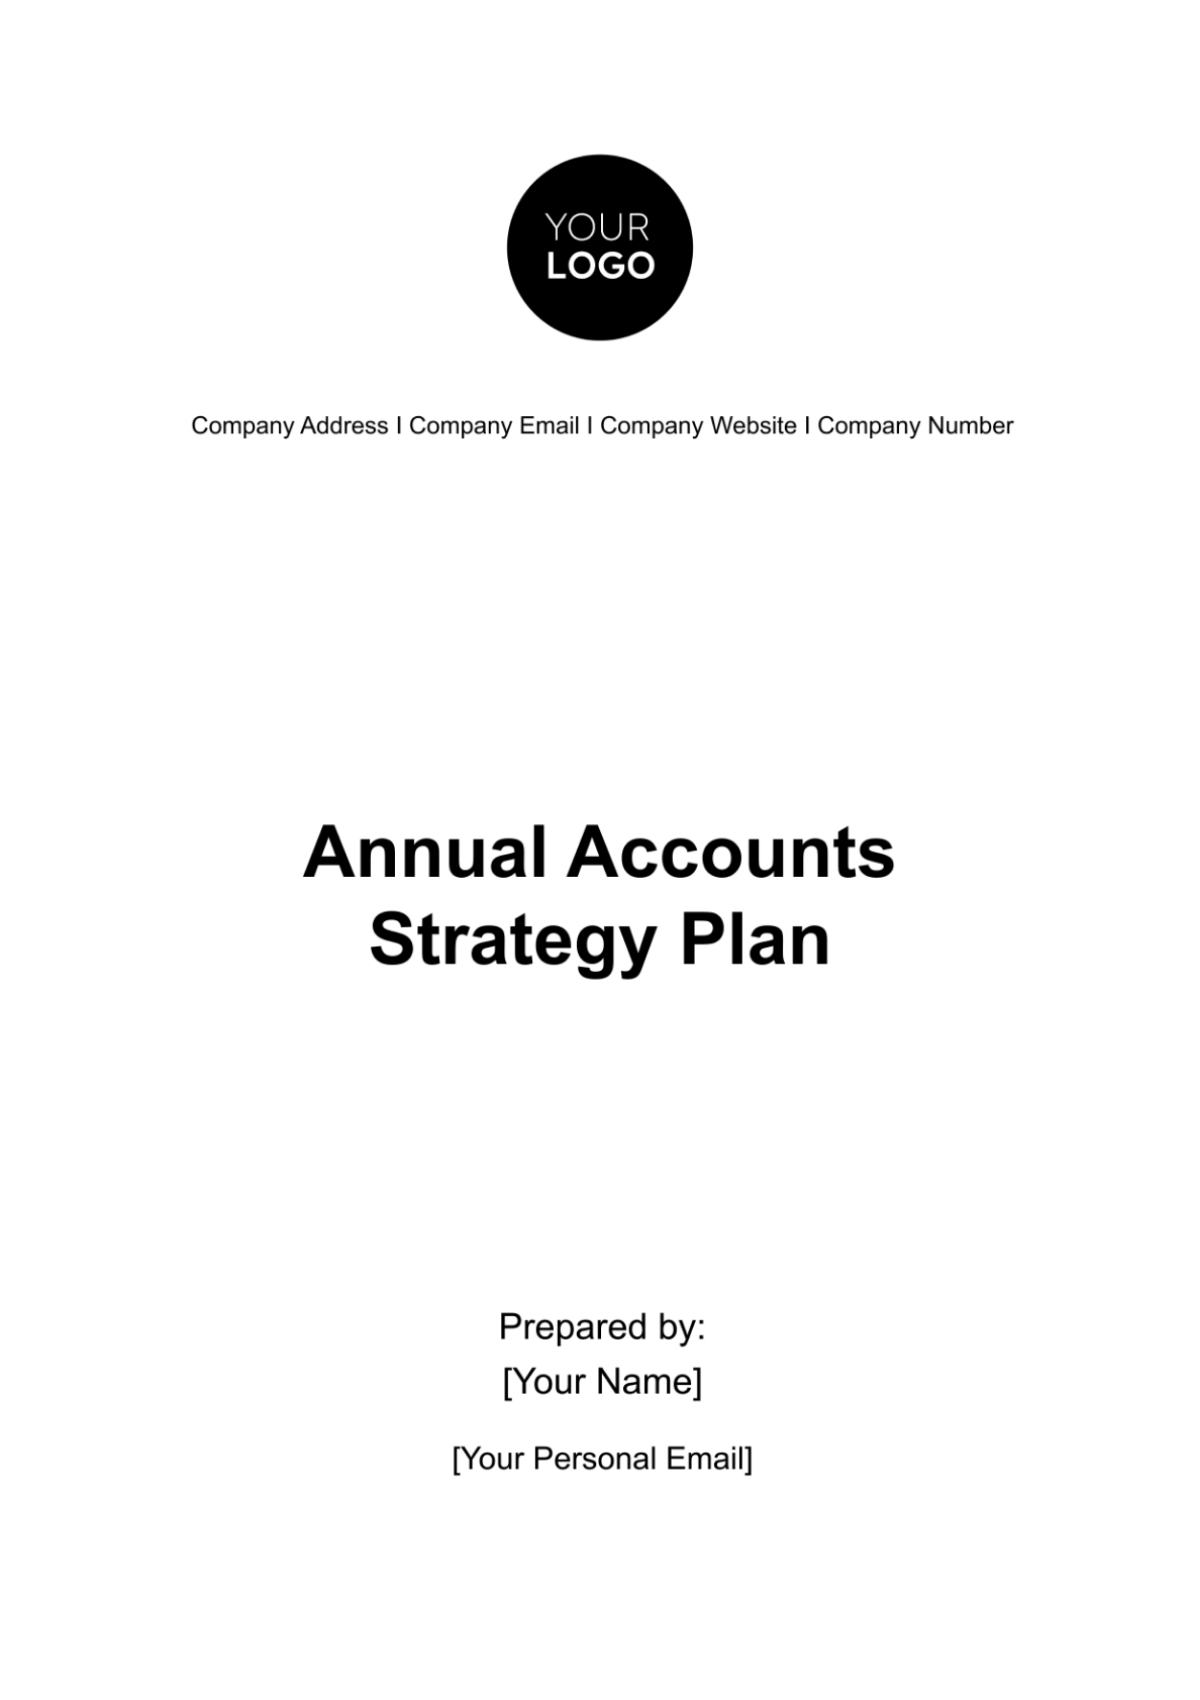 Annual Accounts Strategy Plan Template